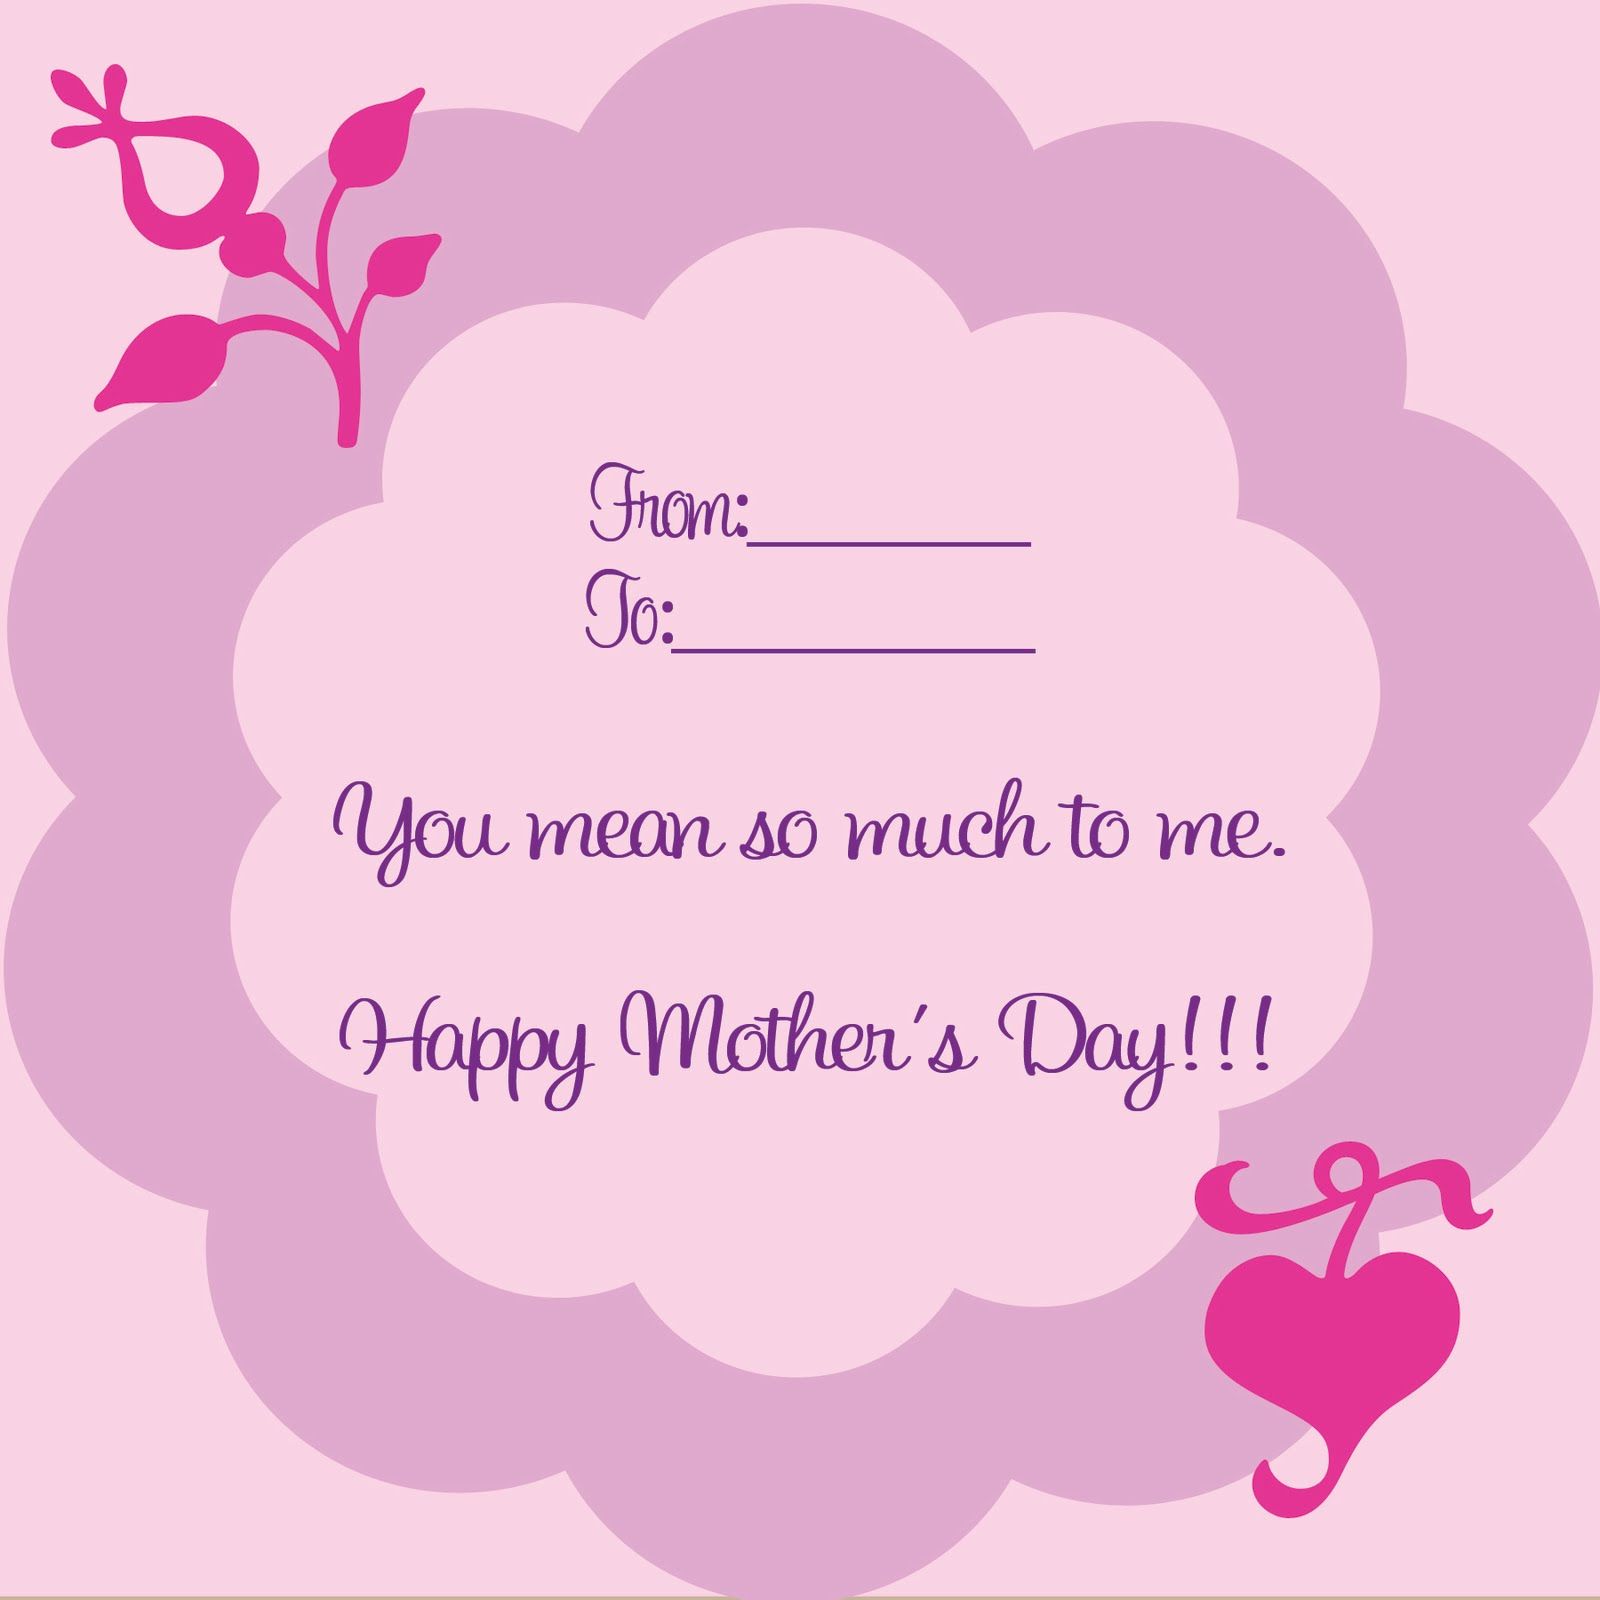 HD wallpaper, Cards, Mothers, Day